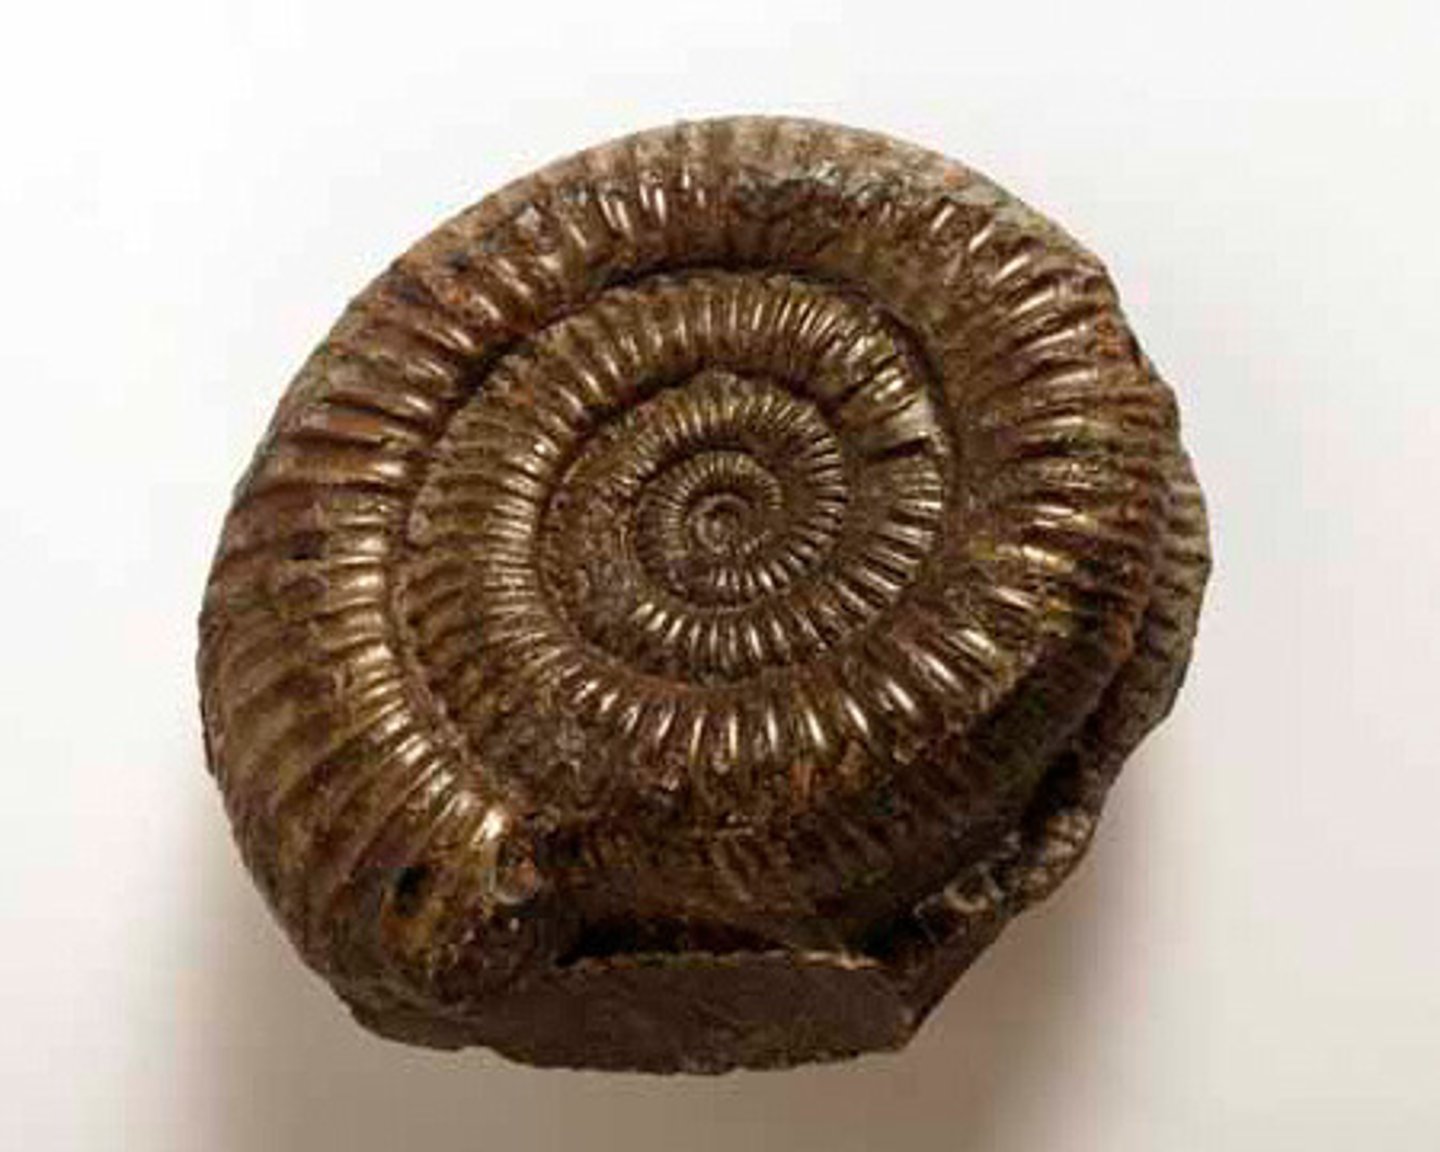 <p>a widespread genus of ammonites from the Lower Jurassic period, approximately 180 million years ago</p>